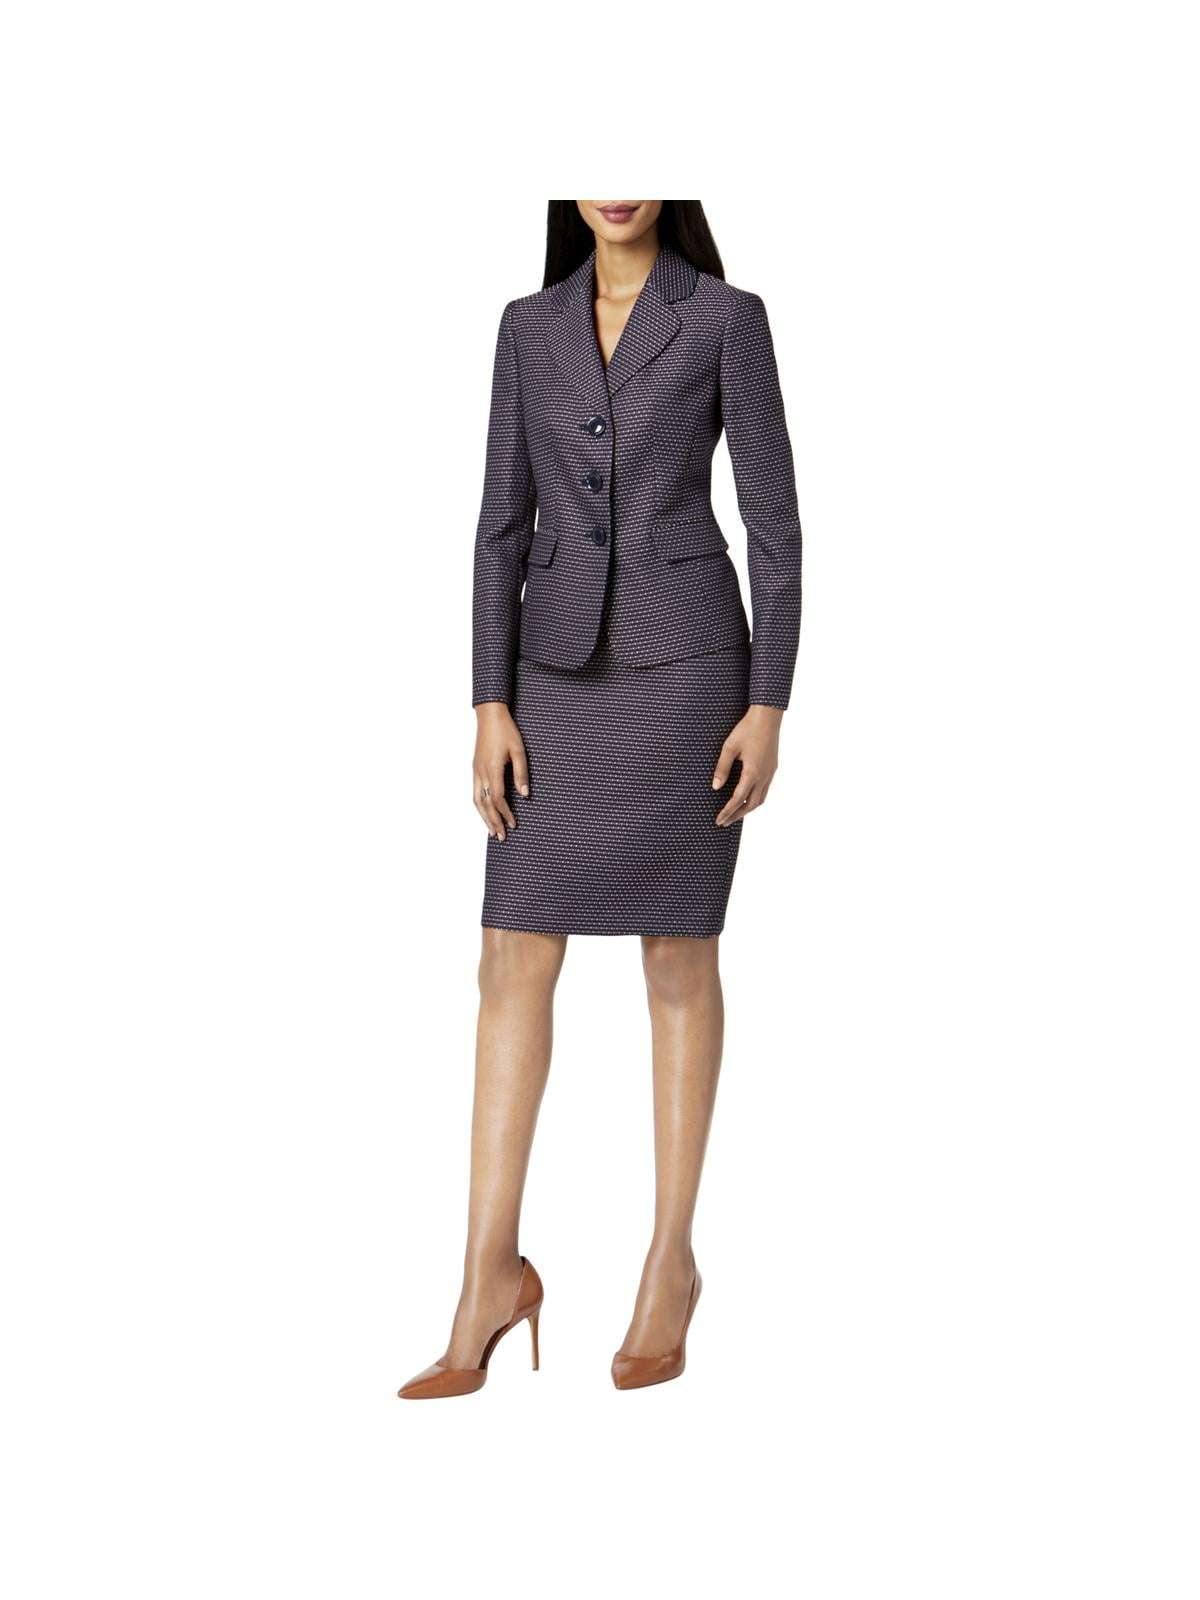 women's professional business suits